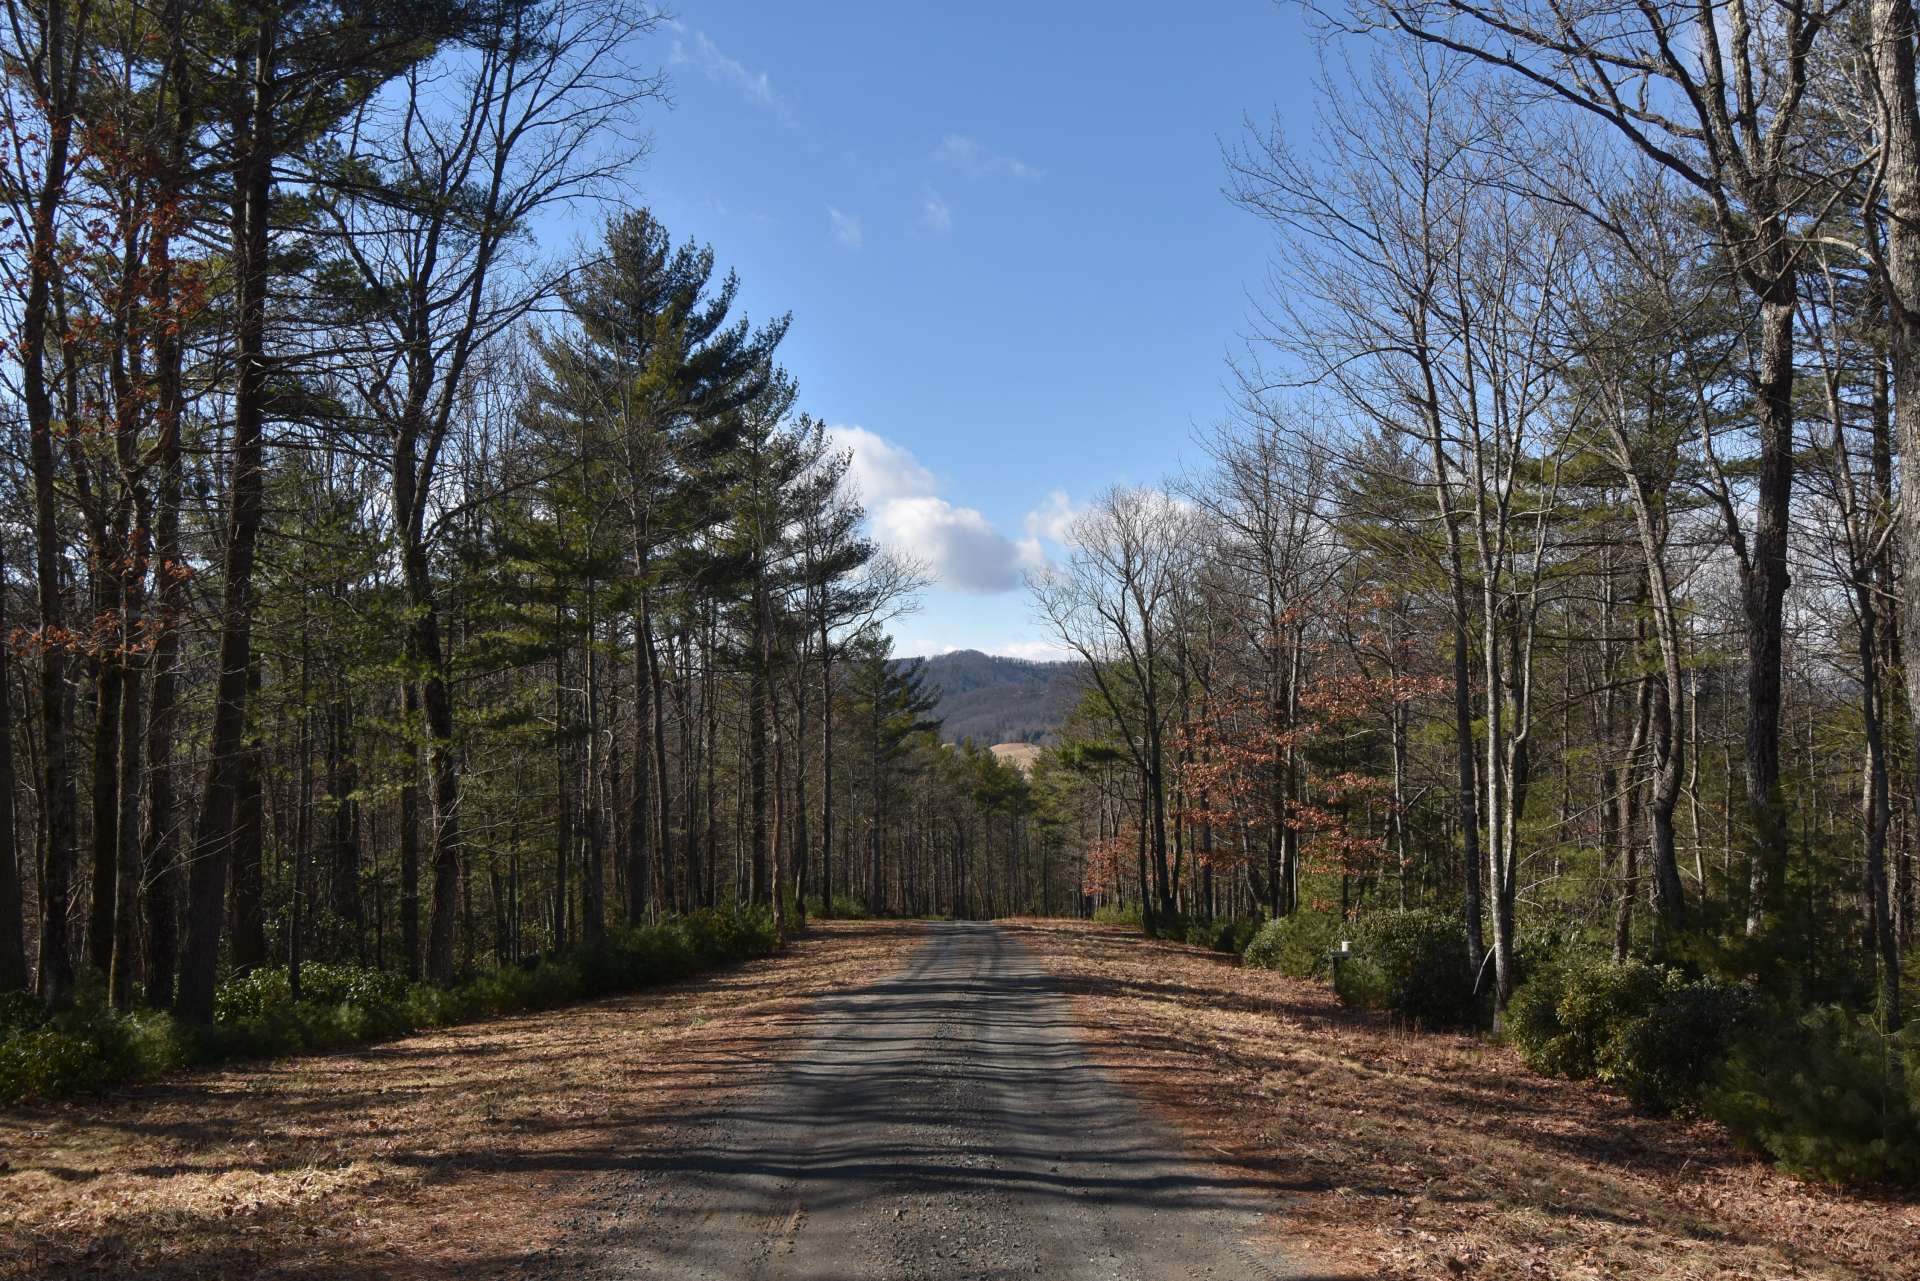 The Glen At Calloway Gap is located in the Eastern end of Ashe County close to the Blue Ridge Parkway and just a 15 minute drive to West Jefferson.